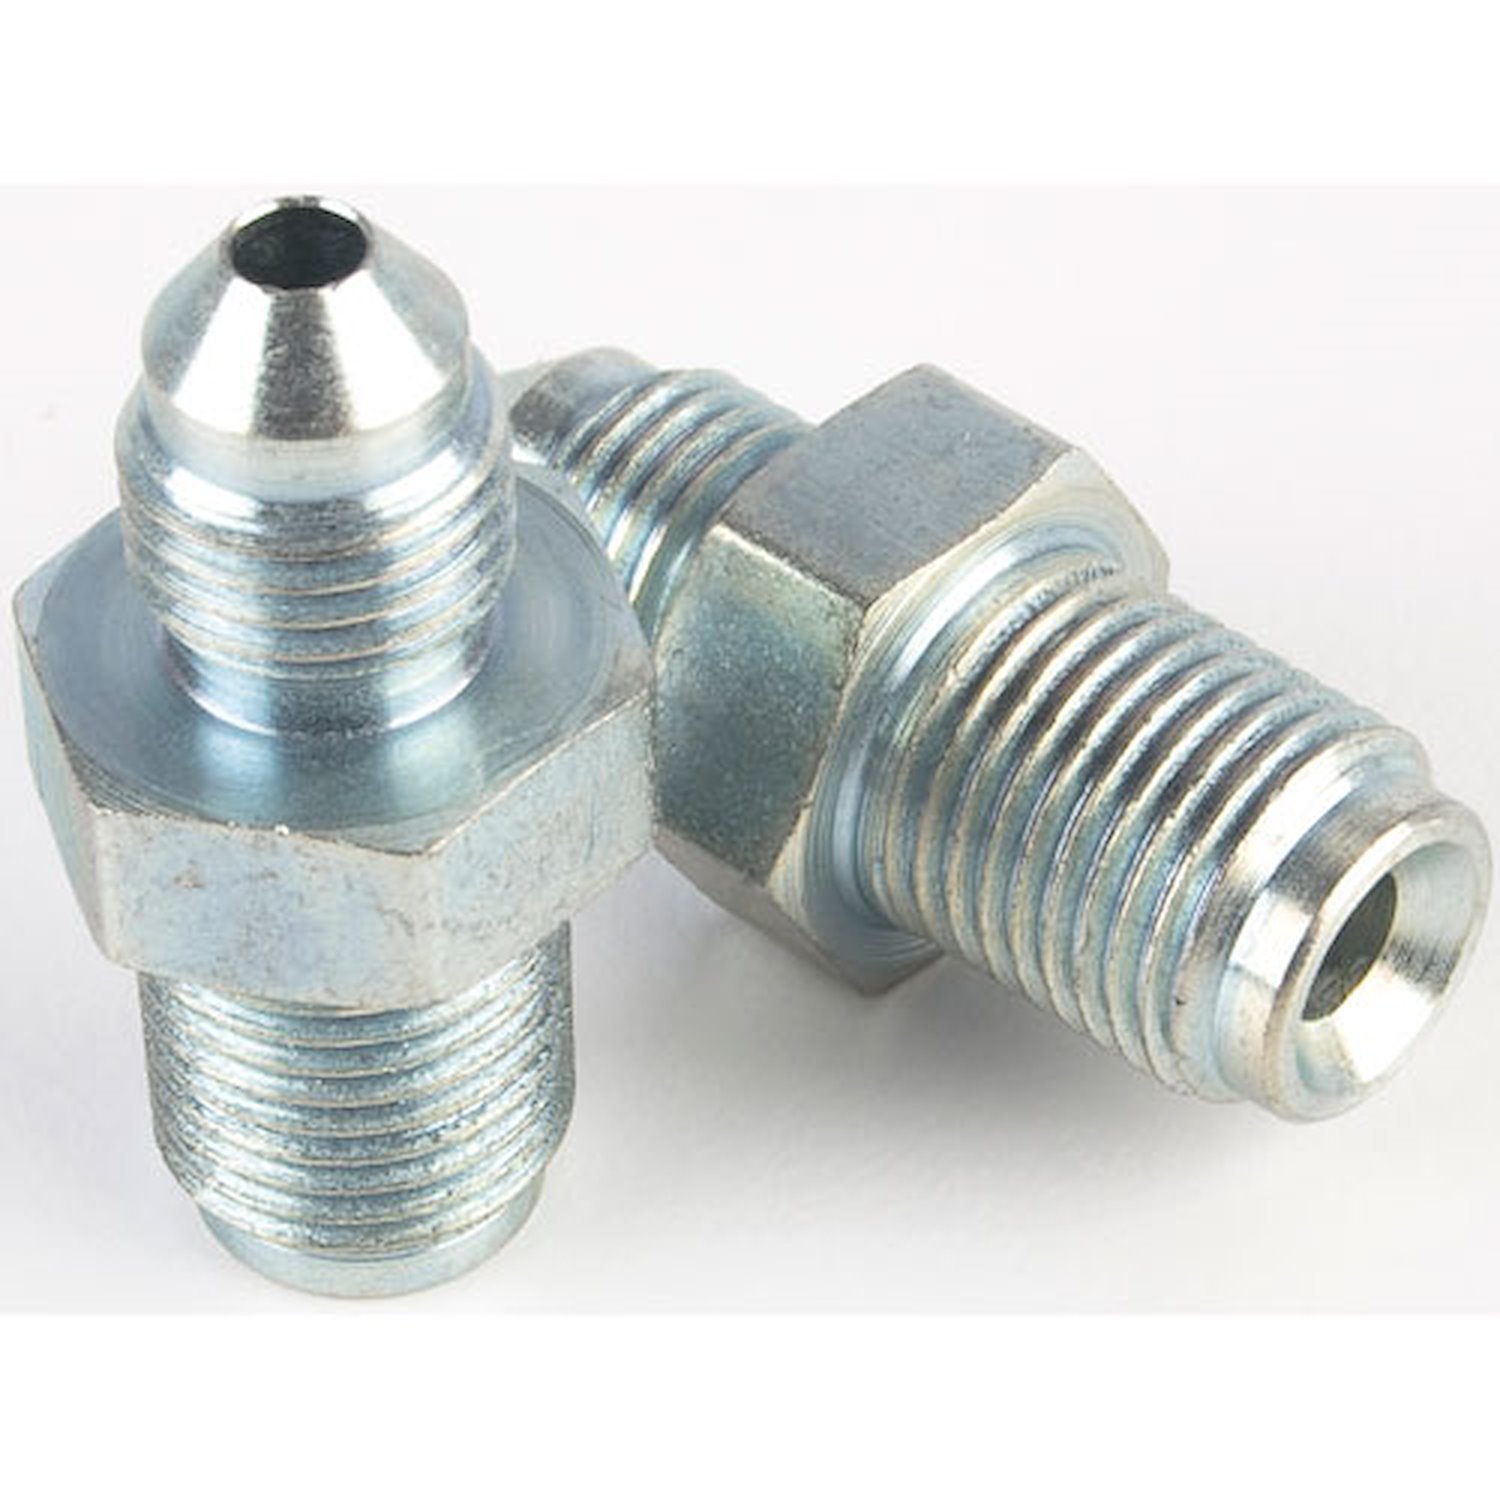 AN to Inverted Flare Male Brake Adapter Fittings [-3 AN Male to 10 mm x 1.0 Male Inverted Flare]